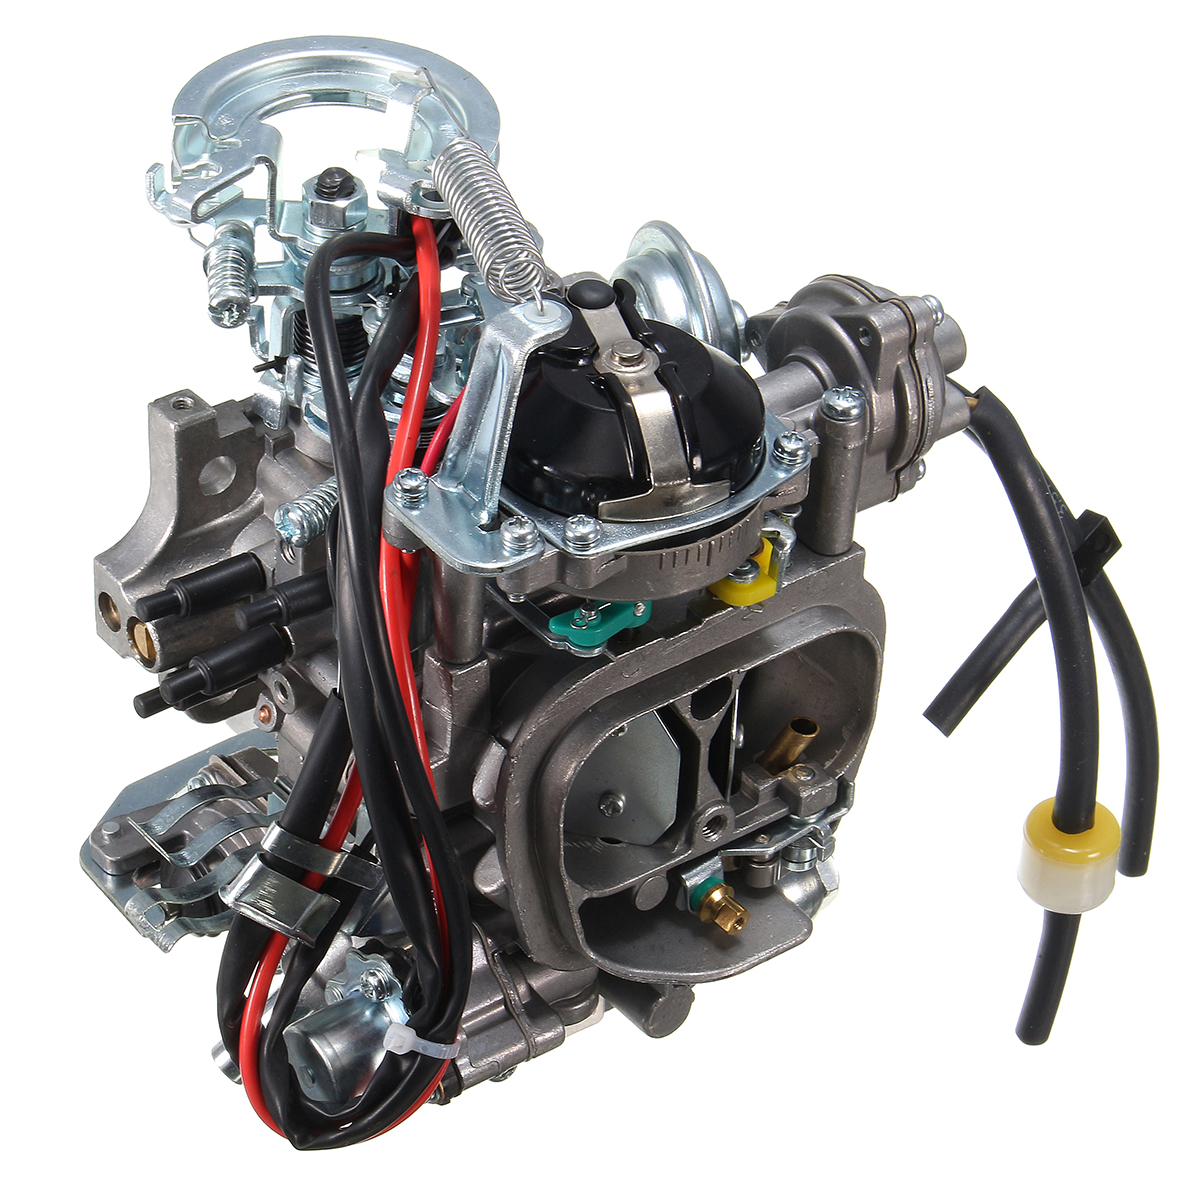 Carb-Carburetor-Trucks-For-Toyota-22R-Celica-4-Runner-Style-Engine-Oil-free-and-Grease-free-1347170